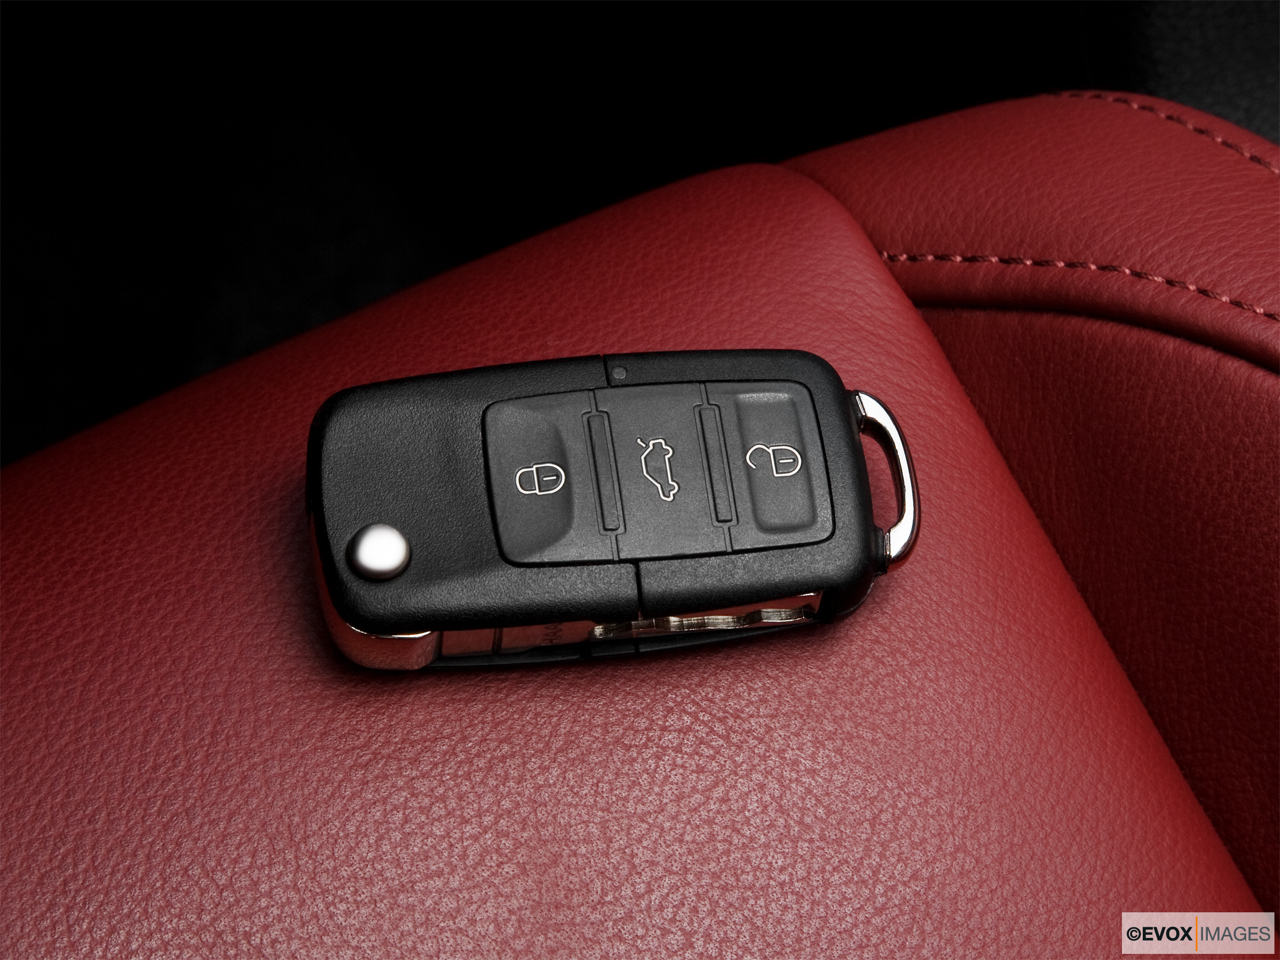 2010 Volkswagen Eos Lux Key fob on driver's seat. 